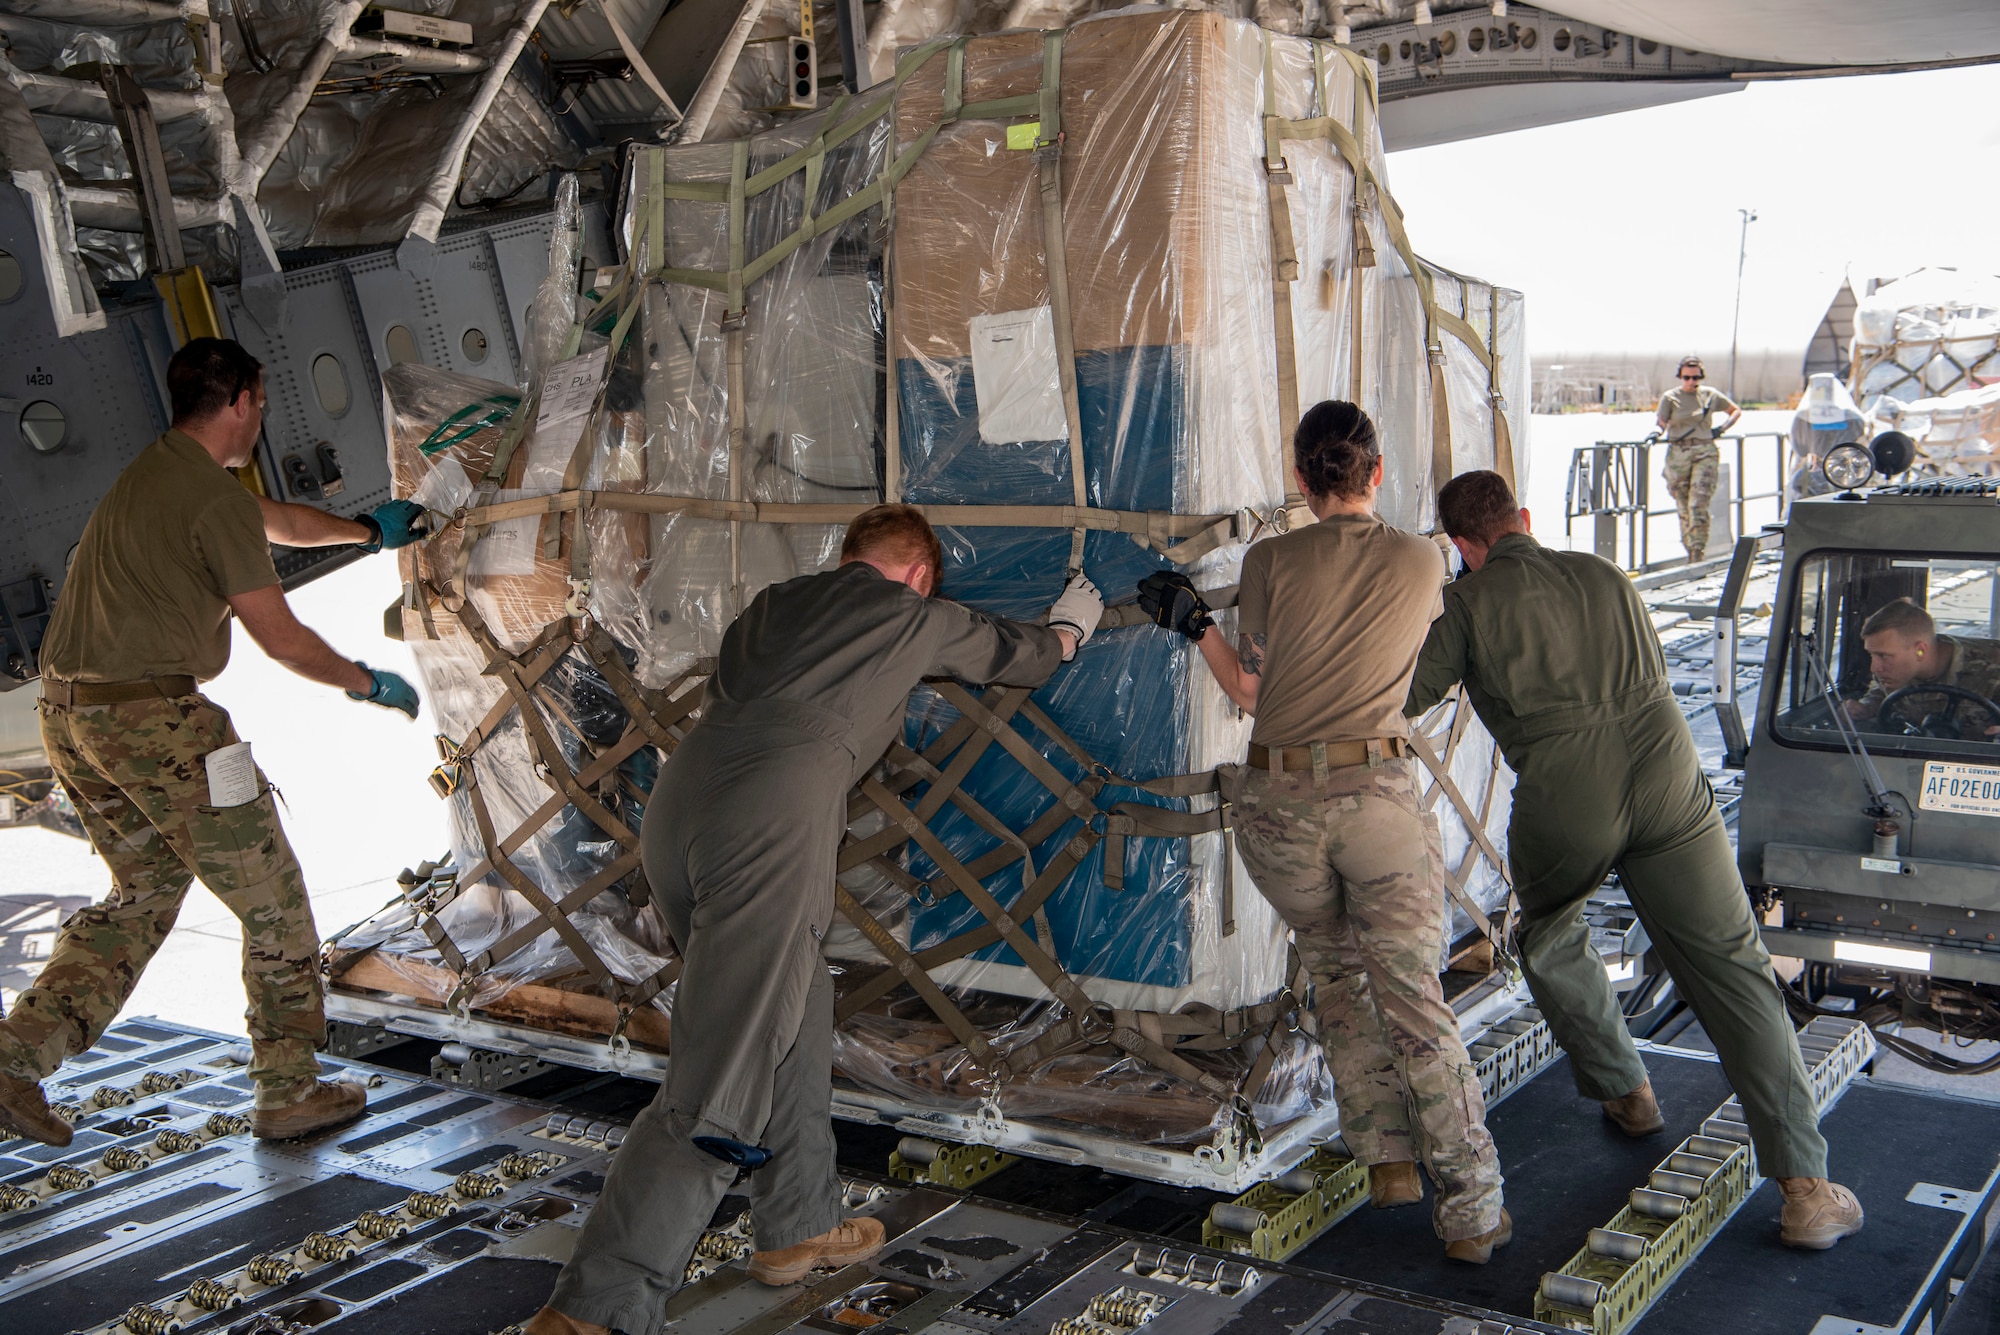 Air Force Reserve aircrew members offload donated food and medical equipment from the rear of a C-17 Globemaster III aircraft at Soto Cano Air Base, Honduras, as part of a weekend combined aircrew training and humanitarian delivery mission in Central America, Feb. 13, 2022. Reserve Citizen Airmen from Joint Base Charleston’s 315th Airlift Wing flew in over 54,000 pounds of donated cargo to the base, all of which is destined for distribution by local charities. (U.S. Air Force photo by Lt. Col. Wayne Capps)